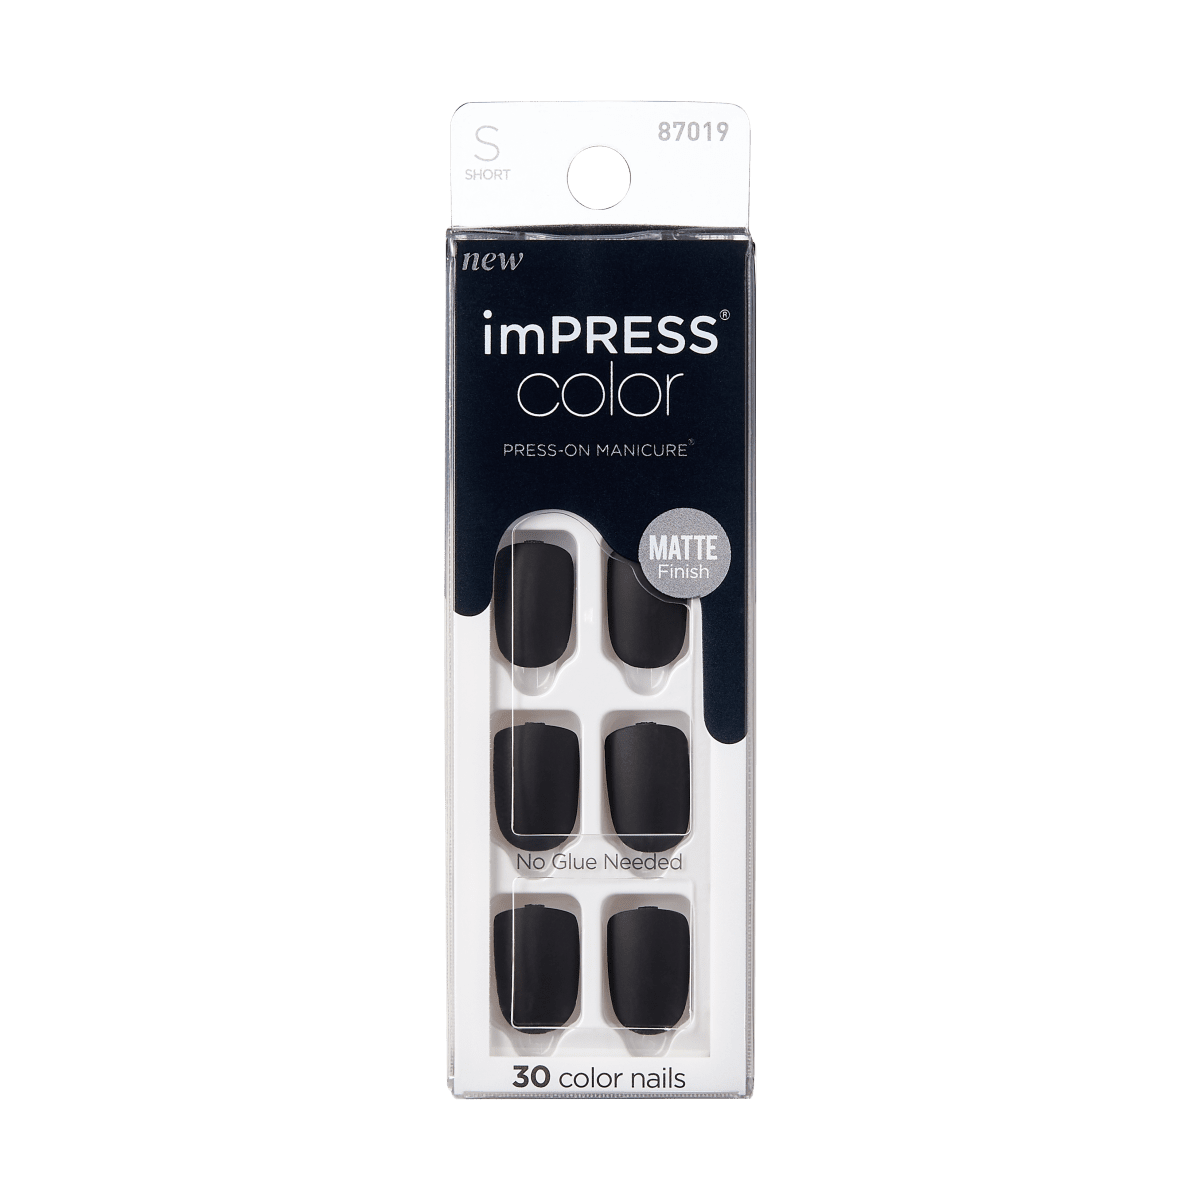 KISS imPRESS No Glue Mani Press On Nails, Color, On the Road, Black, Short Squoval, 30ct